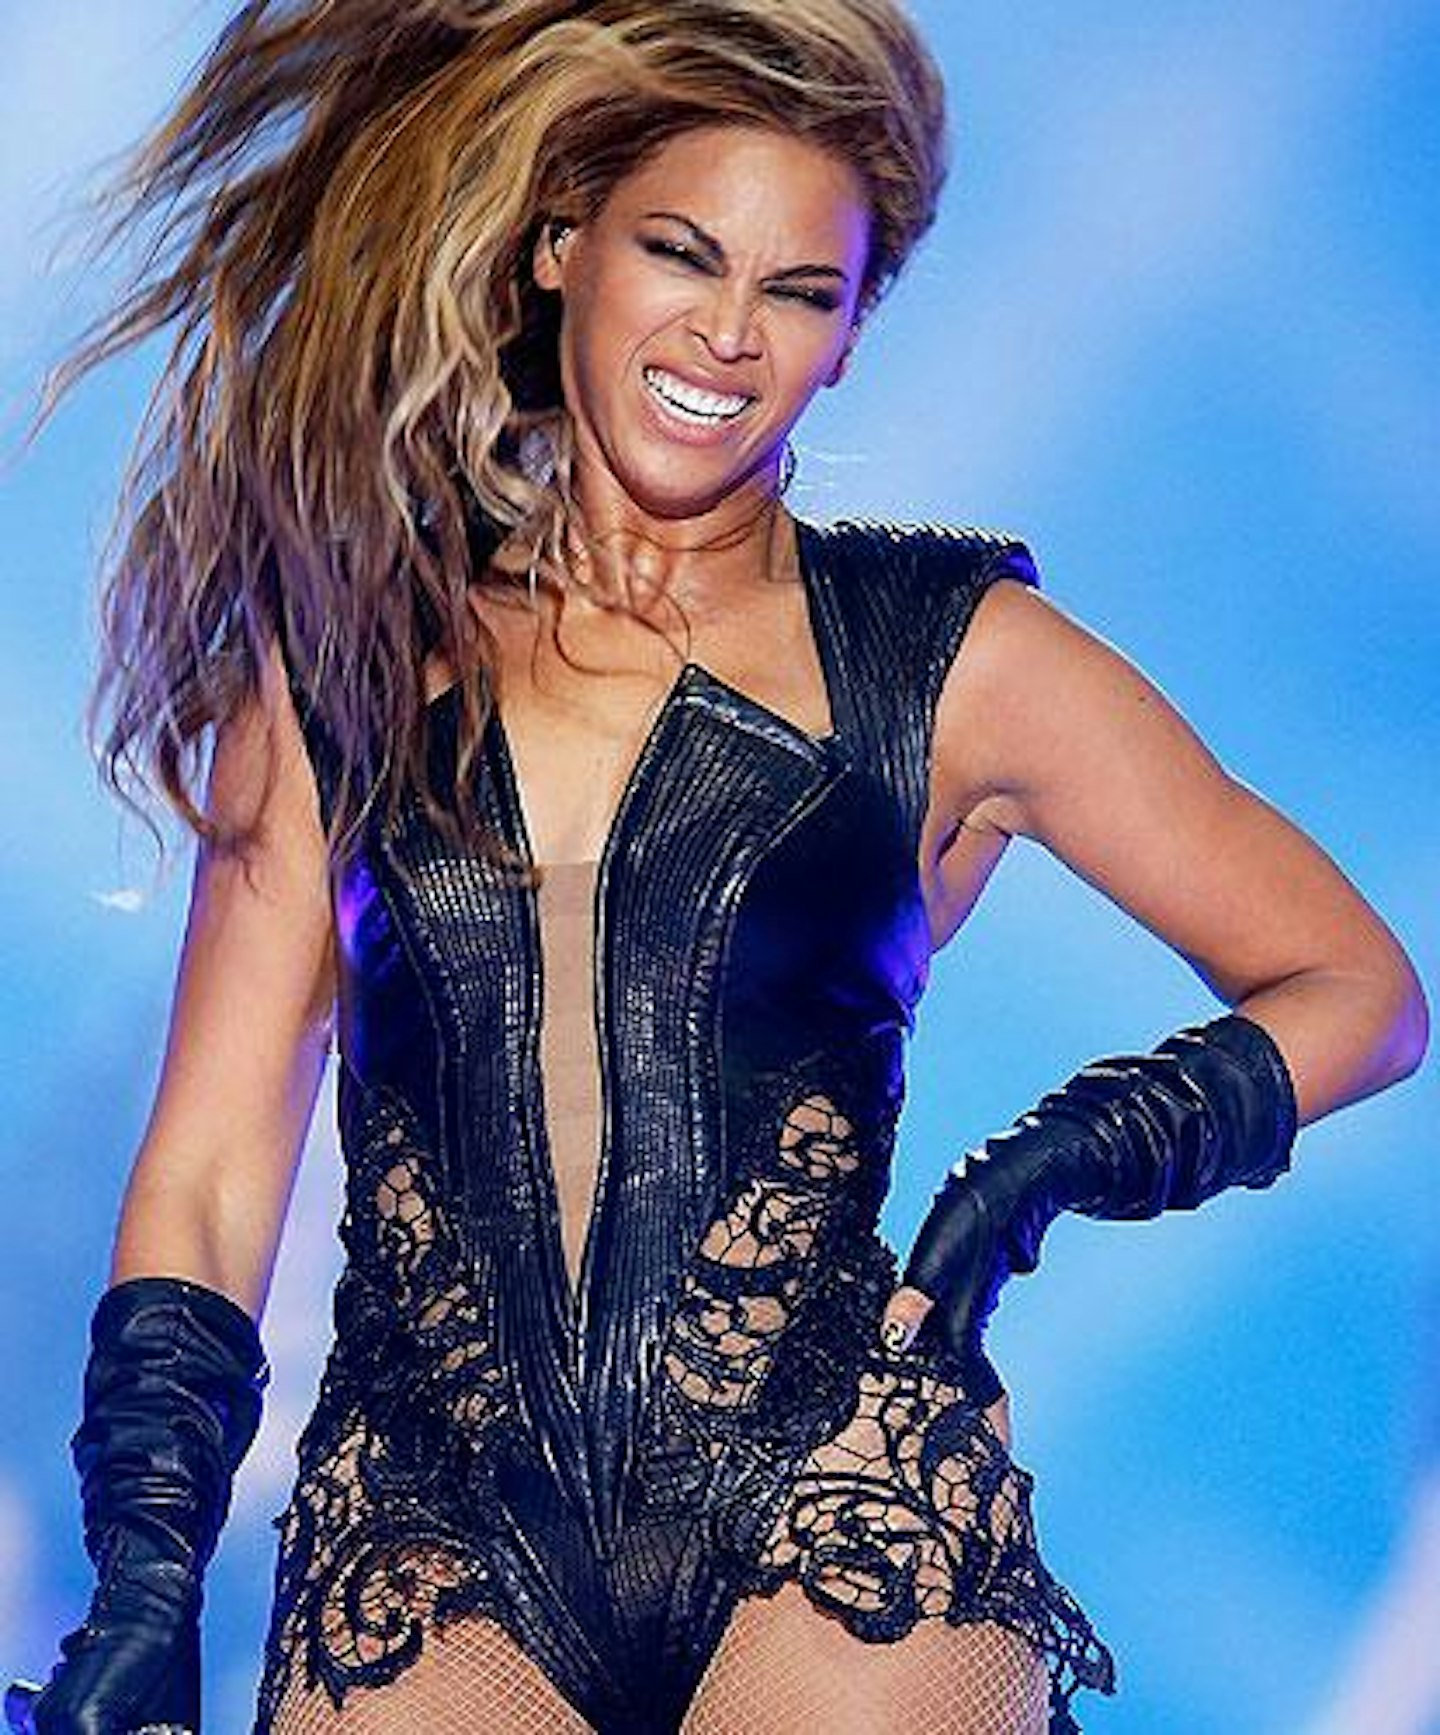 Beyonce's publicist was unhappy with unflattering photos taken at the super bowl